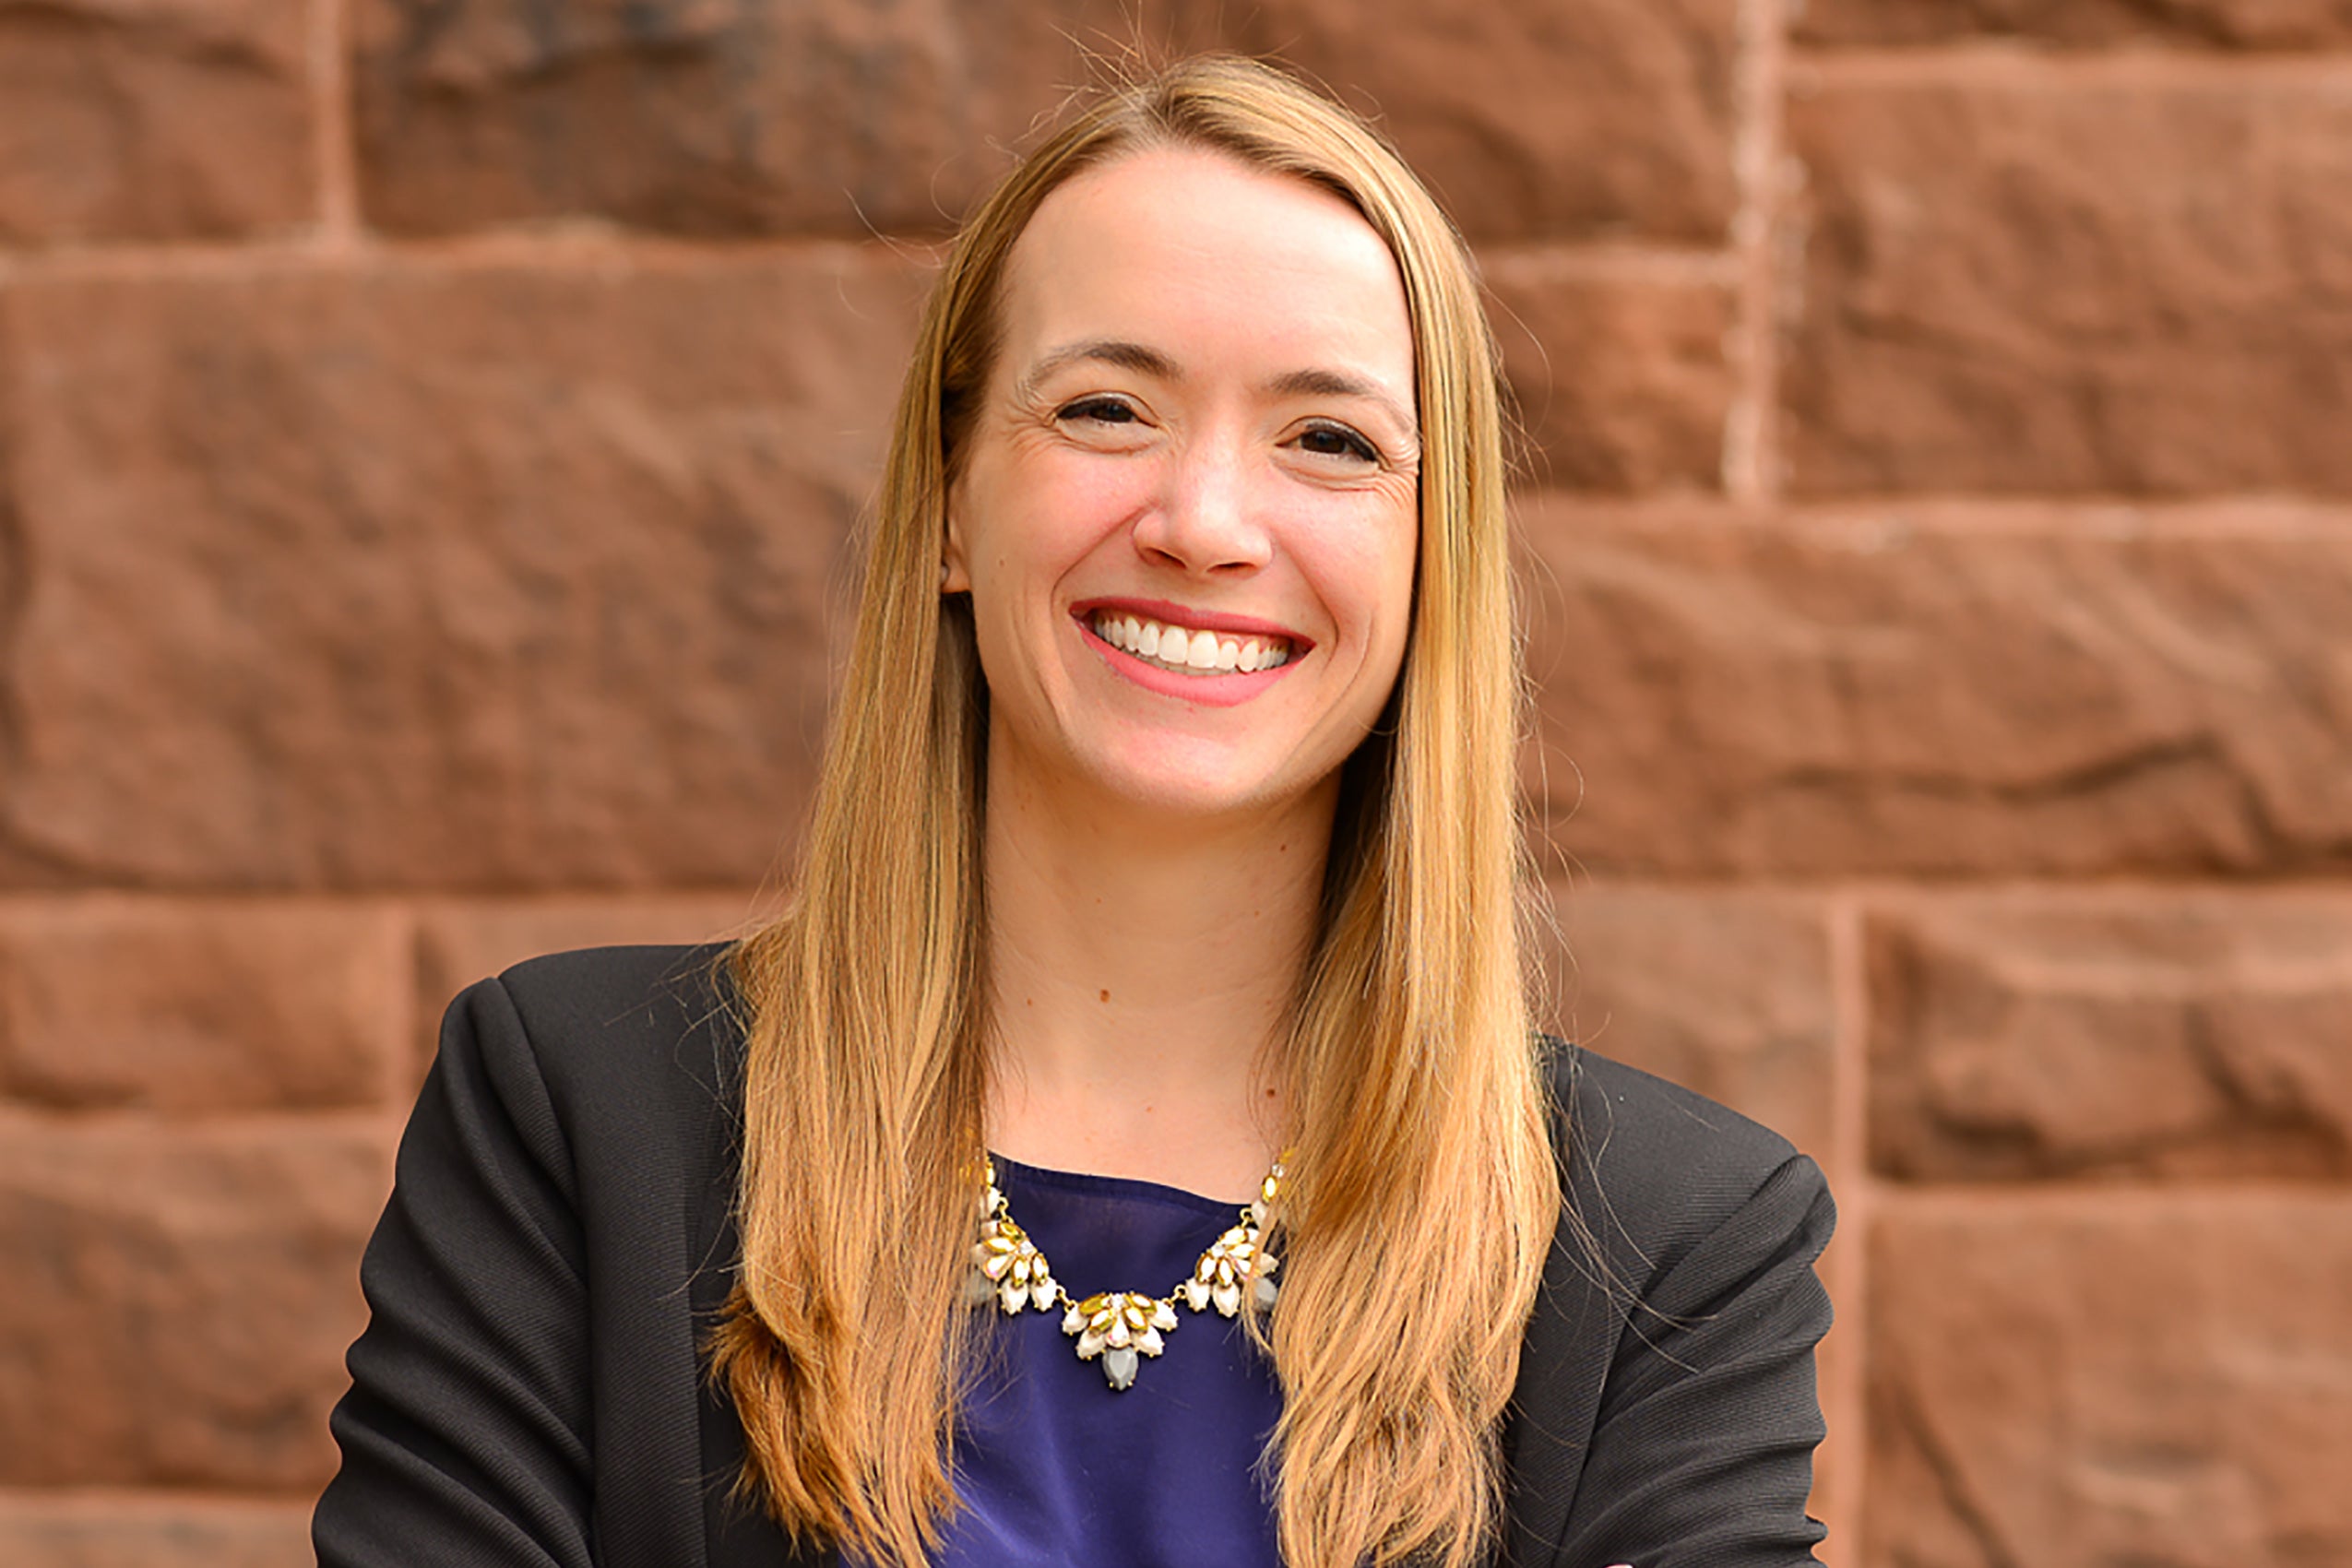 Kristi Jobson ’12 joins HLS as chief admissions officer